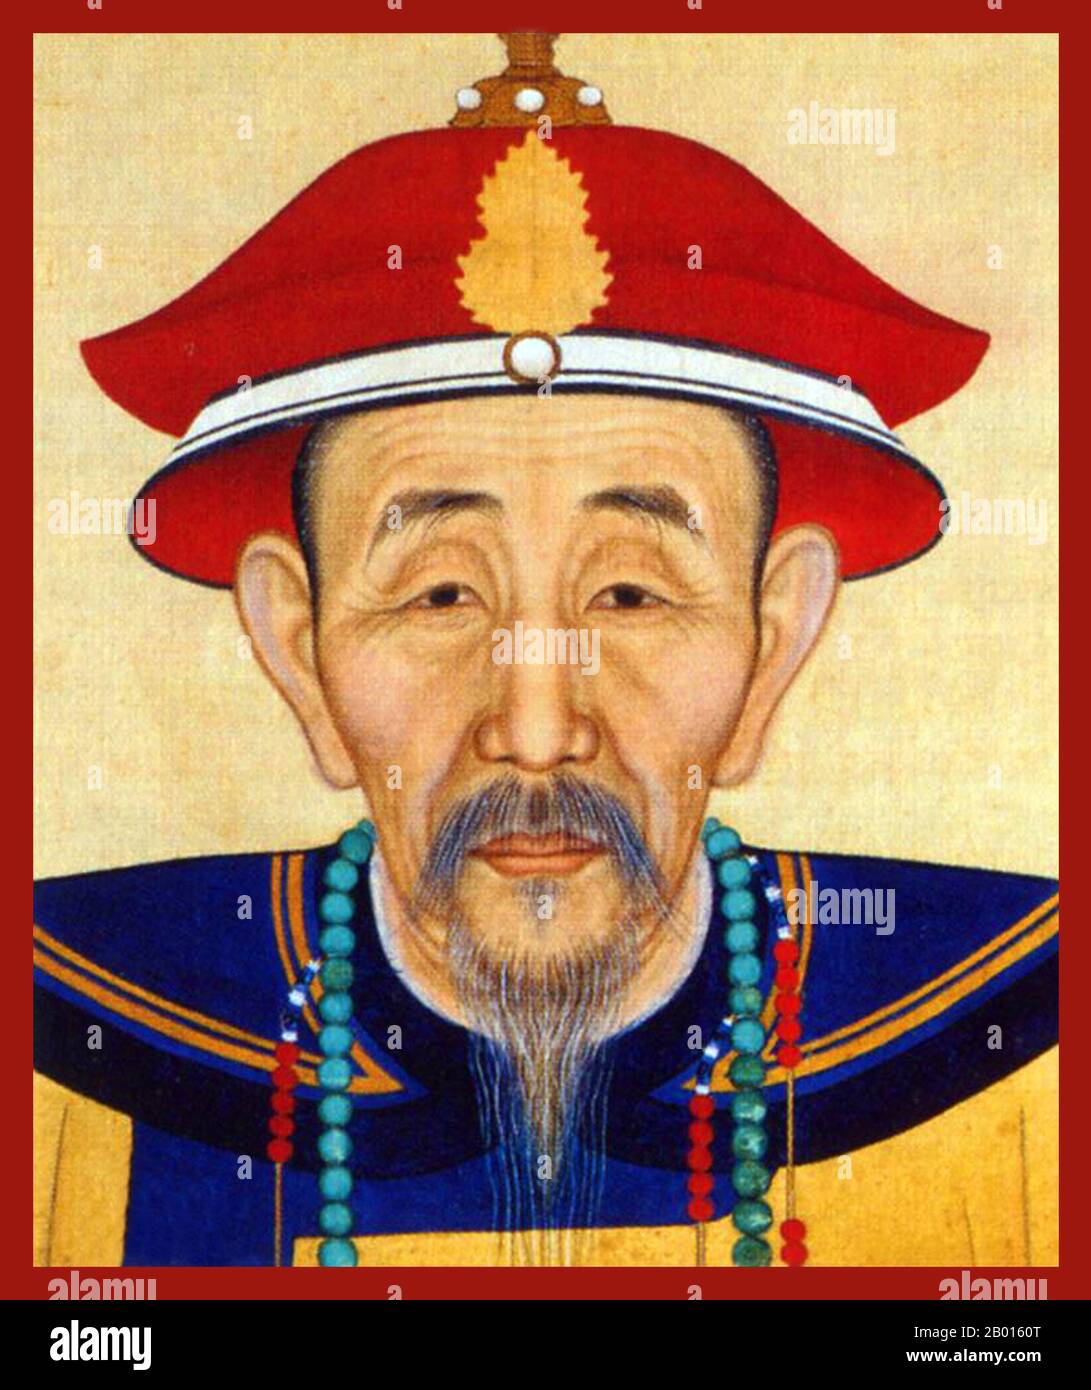 https://c8.alamy.com/comp/2B0160T/china-kangxi-4-may-1654-20-december-1722-4th-emperor-of-the-qing-dynasty-hanging-scroll-painting-early-18th-century-emperor-kangxi-personal-name-xuanye-and-temple-name-shengzu-was-the-fourth-ruler-of-the-qing-dynasty-and-the-second-qing-emperor-to-rule-over-china-proper-from-1661-to-1722-kangxis-reign-of-61-years-makes-him-the-longest-reigning-chinese-emperor-in-history-although-his-grandson-the-qianlong-emperor-had-the-longest-period-of-de-facto-power-and-one-of-the-longest-reigning-rulers-in-the-world-he-was-considered-one-of-chinas-greatest-emperors-2B0160T.jpg